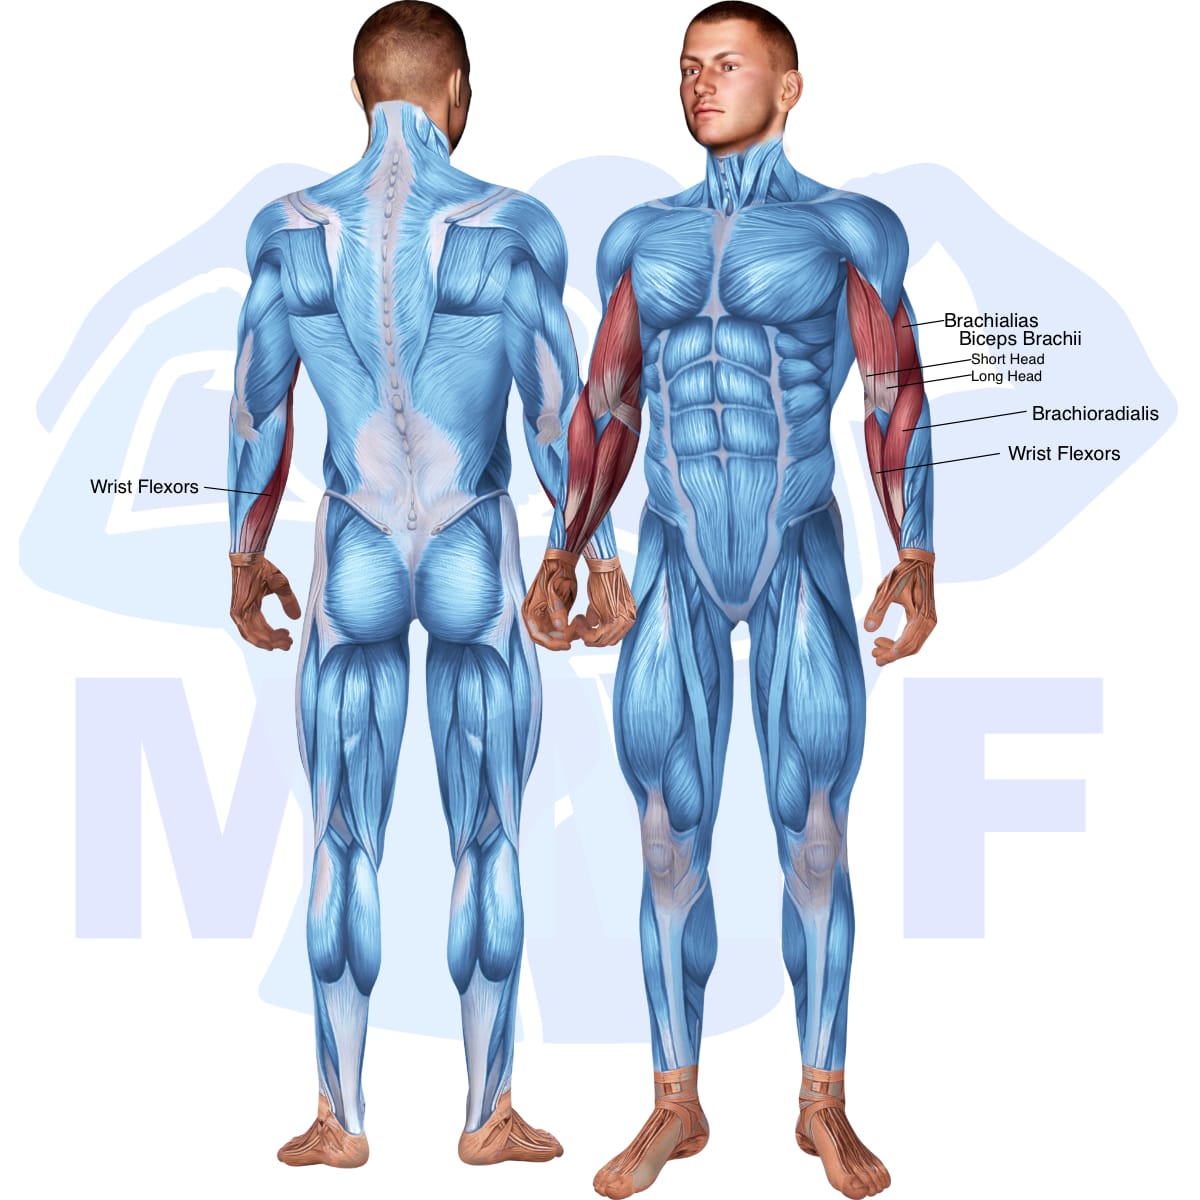 Image of the skeletal muscular system with the muscles used in the one arm preacher cable curl exercise highlighted in red and the rest in blue.